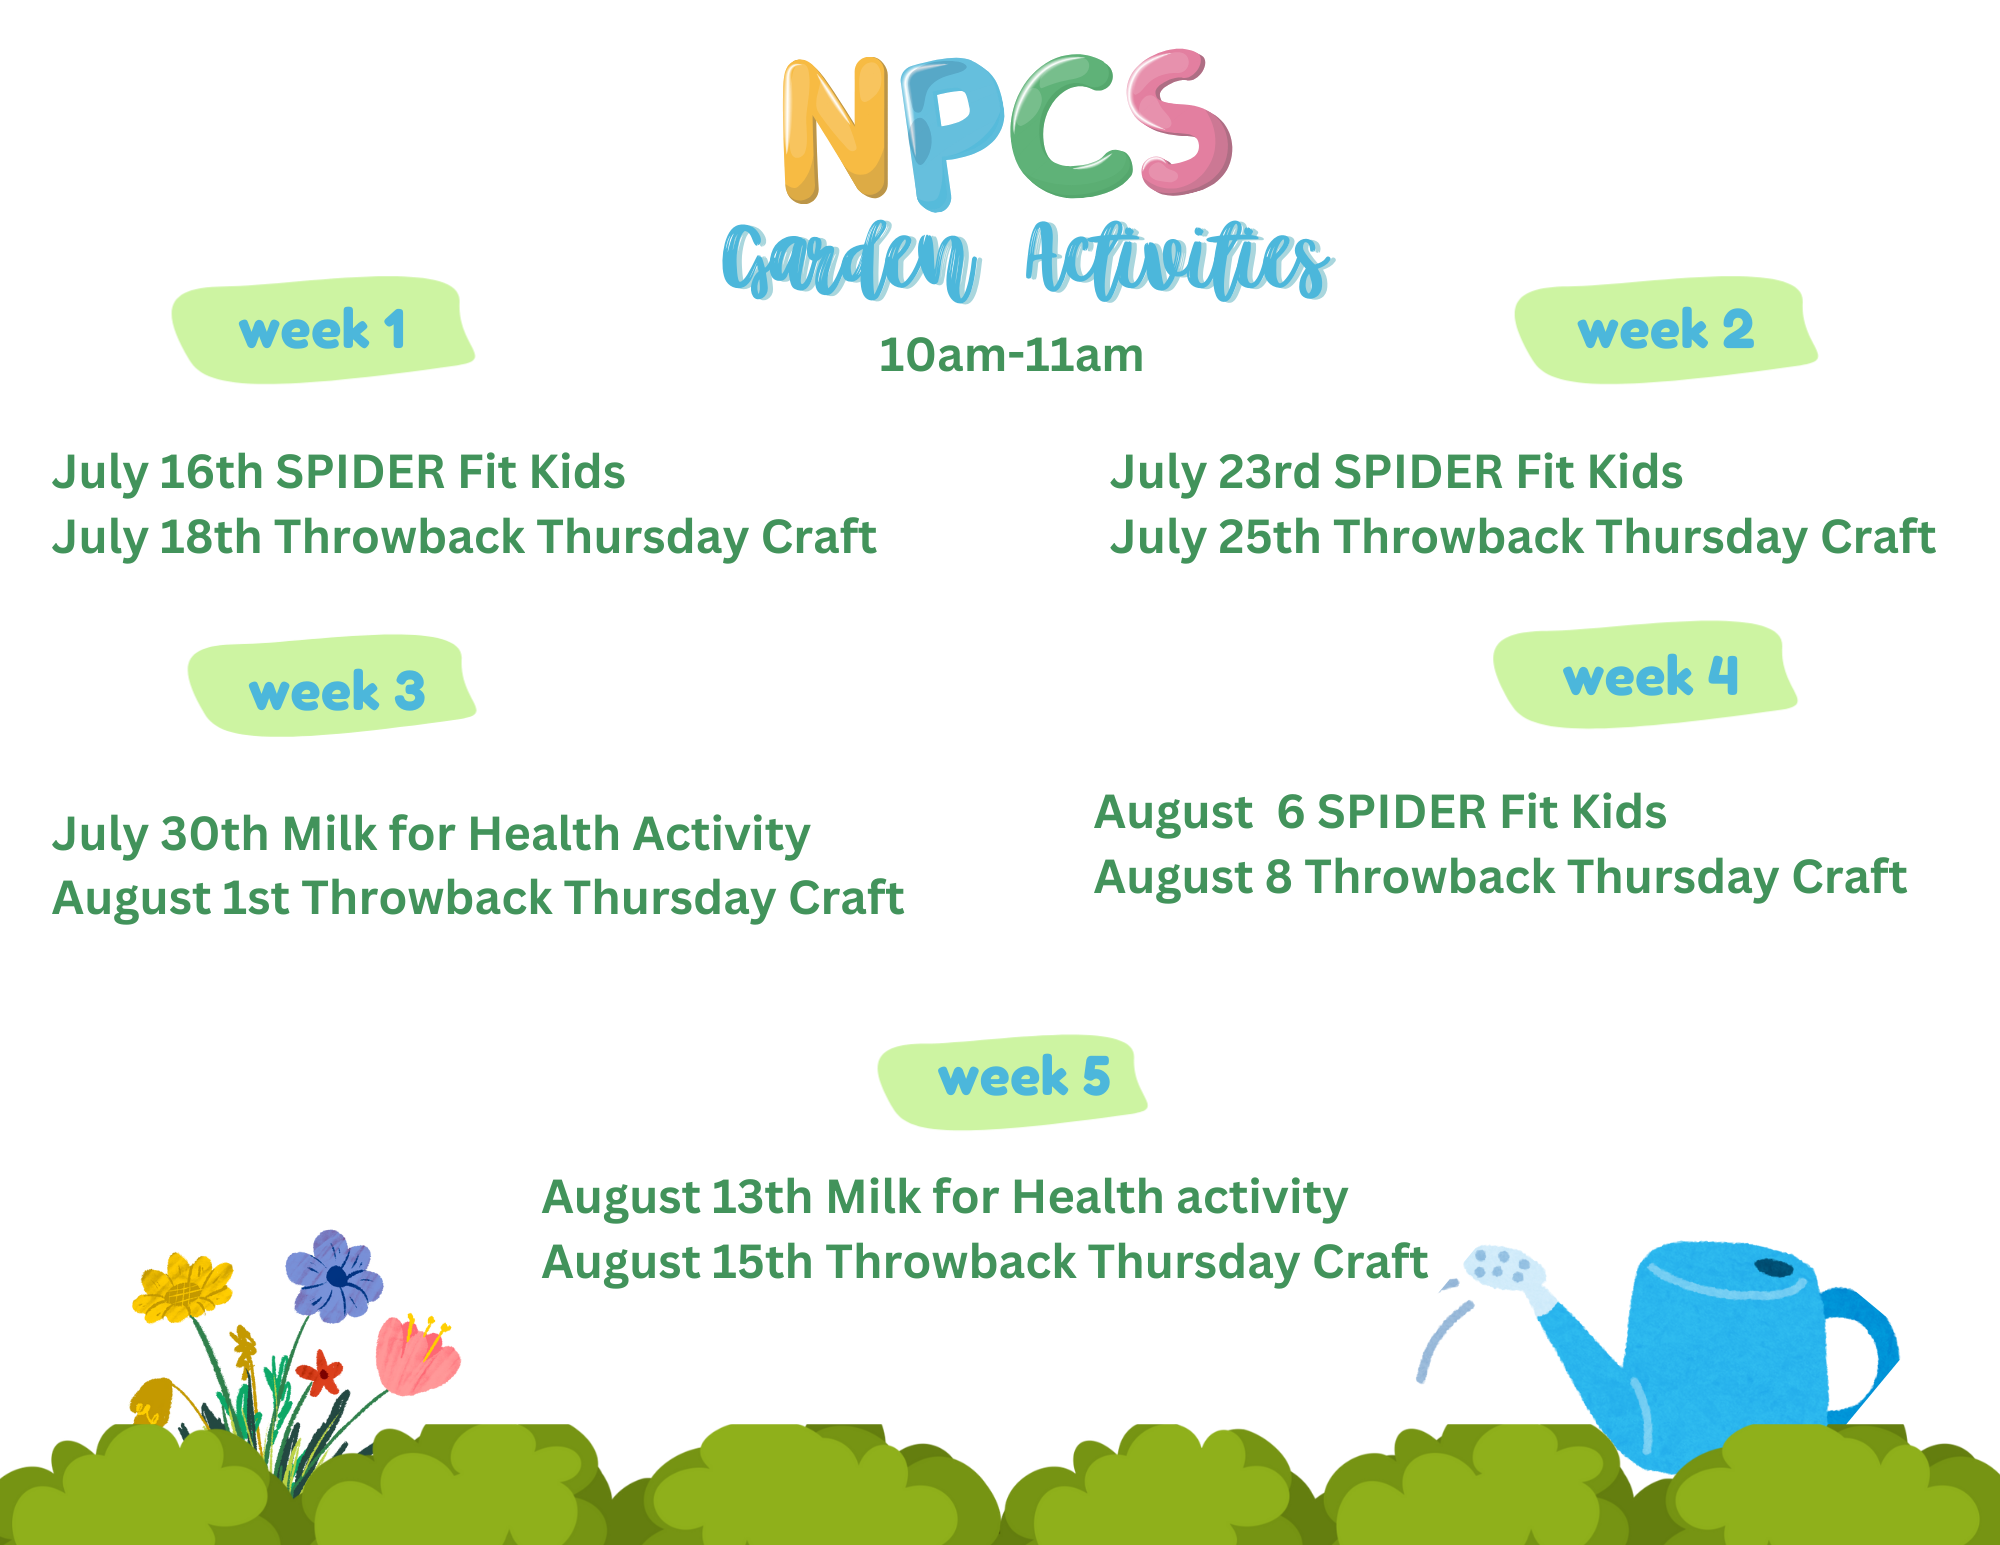 dates that the garden activities will occur over summer